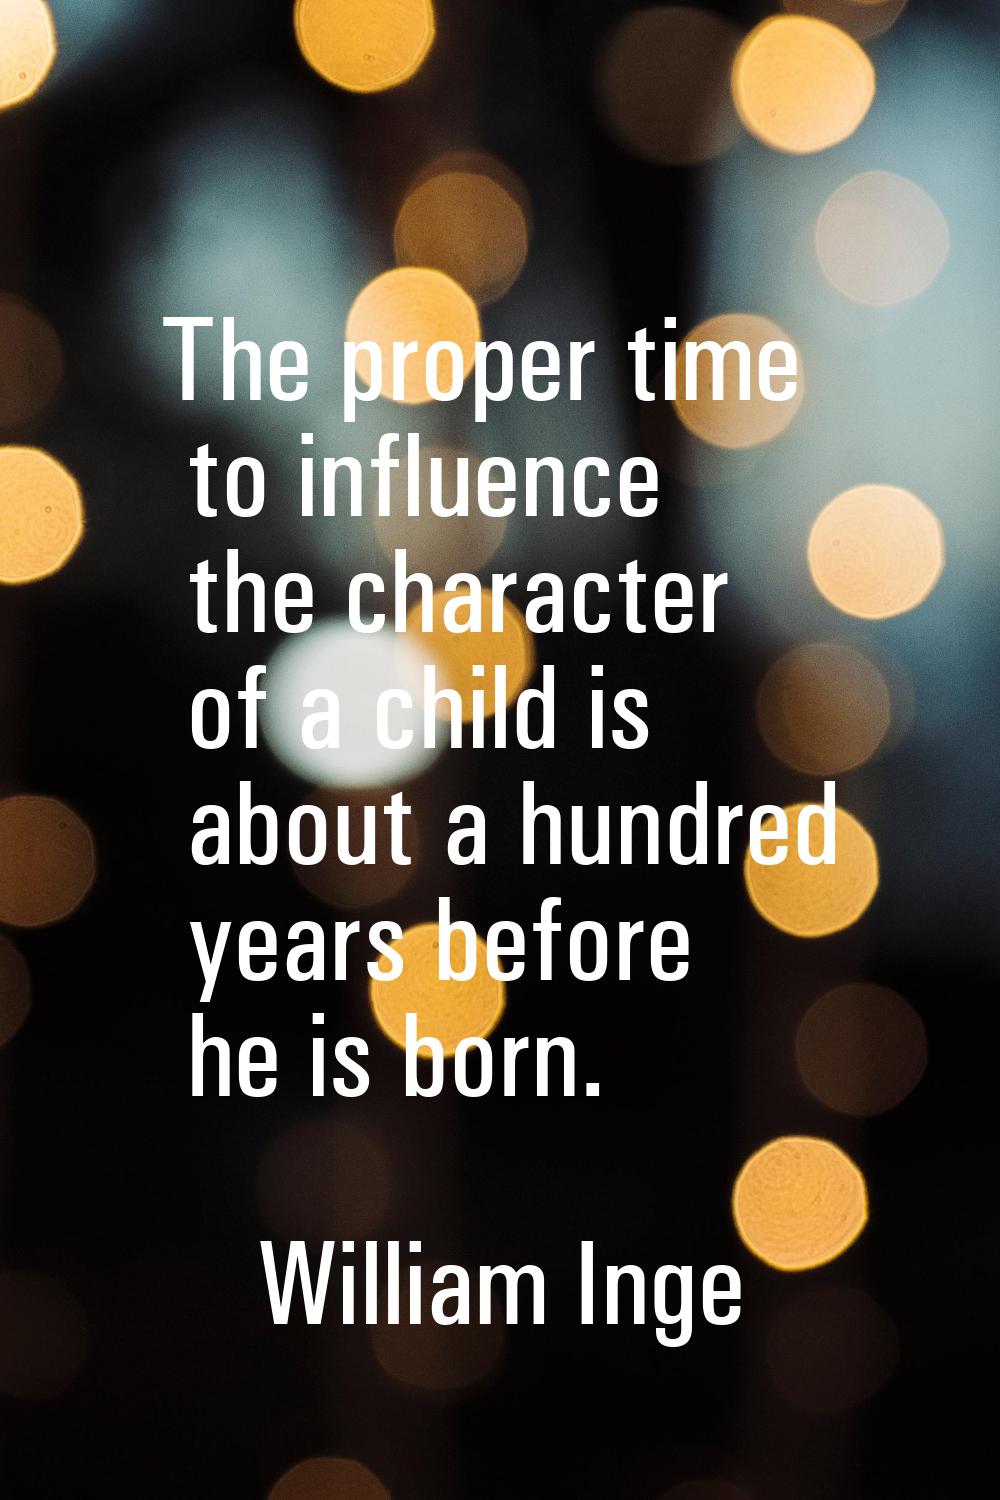 The proper time to influence the character of a child is about a hundred years before he is born.